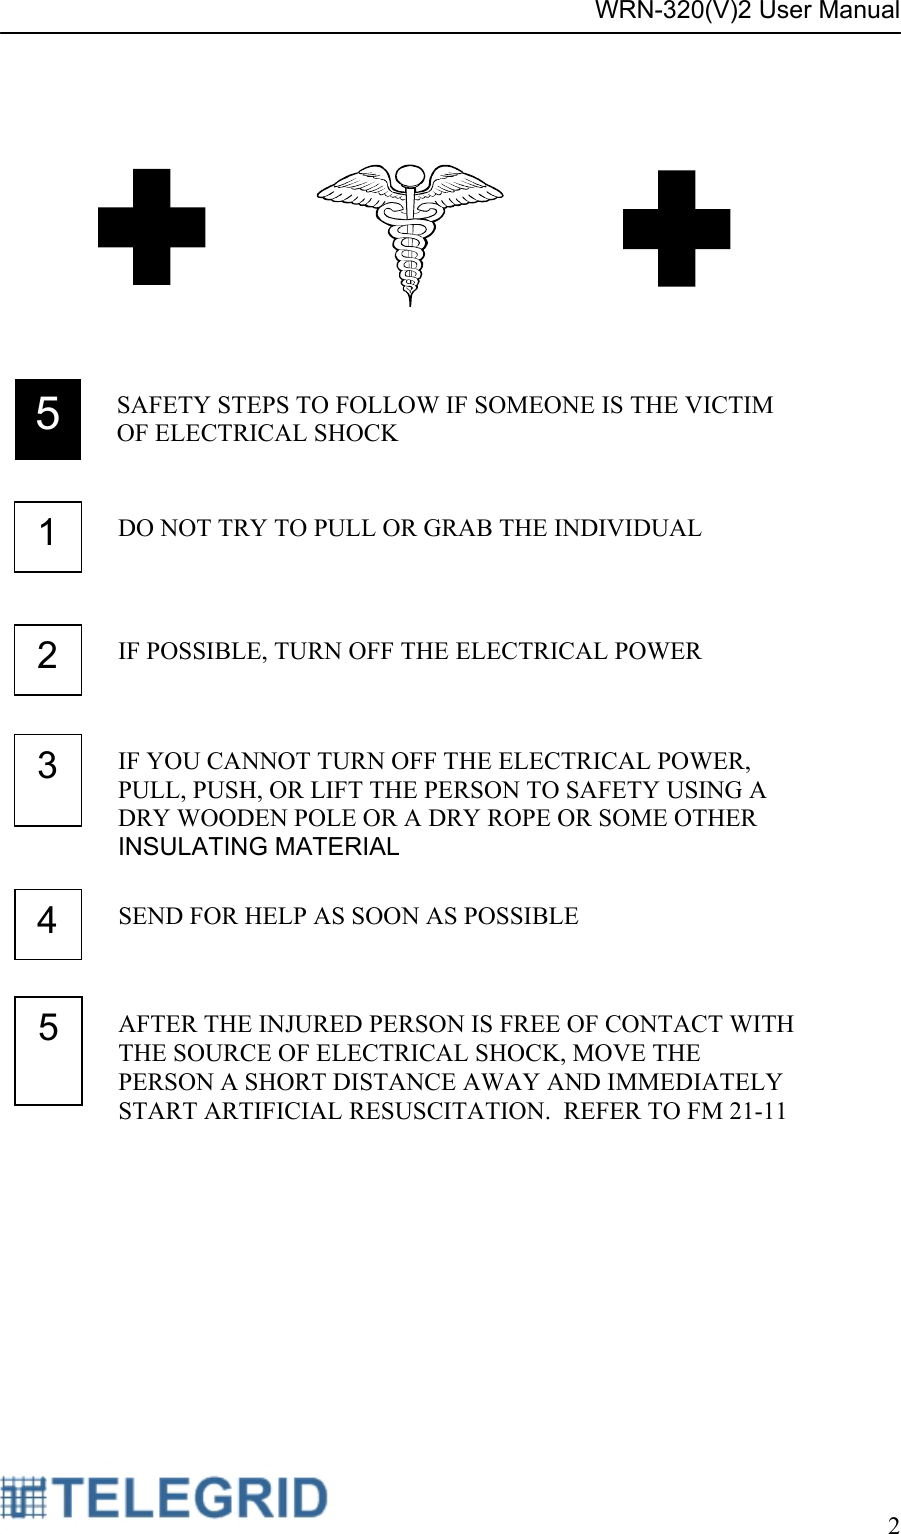 WRN-320(V)2 User Manual     2       5  SAFETY STEPS TO FOLLOW IF SOMEONE IS THE VICTIM OF ELECTRICAL SHOCK4  SEND FOR HELP AS SOON AS POSSIBLE 2  IF POSSIBLE, TURN OFF THE ELECTRICAL POWER 3  IF YOU CANNOT TURN OFF THE ELECTRICAL POWER, PULL, PUSH, OR LIFT THE PERSON TO SAFETY USING A DRY WOODEN POLE OR A DRY ROPE OR SOME OTHER INSULATING MATERIAL1  DO NOT TRY TO PULL OR GRAB THE INDIVIDUAL 5  AFTER THE INJURED PERSON IS FREE OF CONTACT WITH THE SOURCE OF ELECTRICAL SHOCK, MOVE THE PERSON A SHORT DISTANCE AWAY AND IMMEDIATELY START ARTIFICIAL RESUSCITATION.  REFER TO FM 21-11 